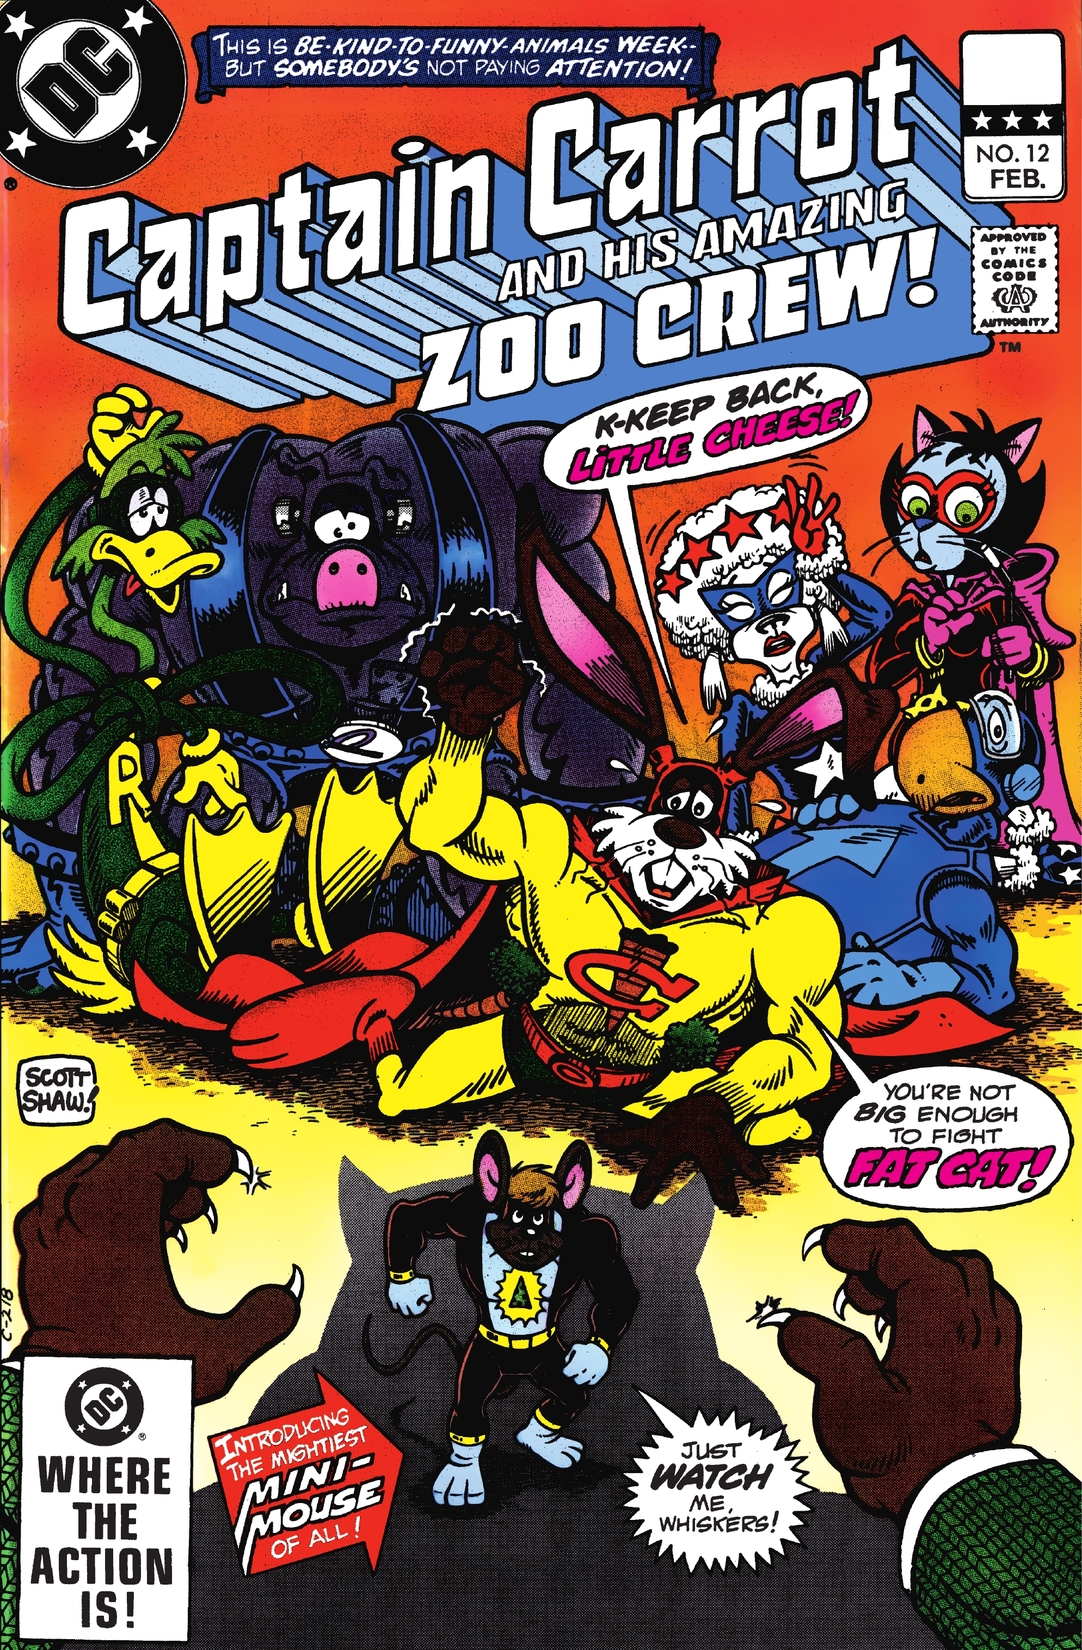 Captain Carrot and His Amazing Zoo Crew #12 preview images